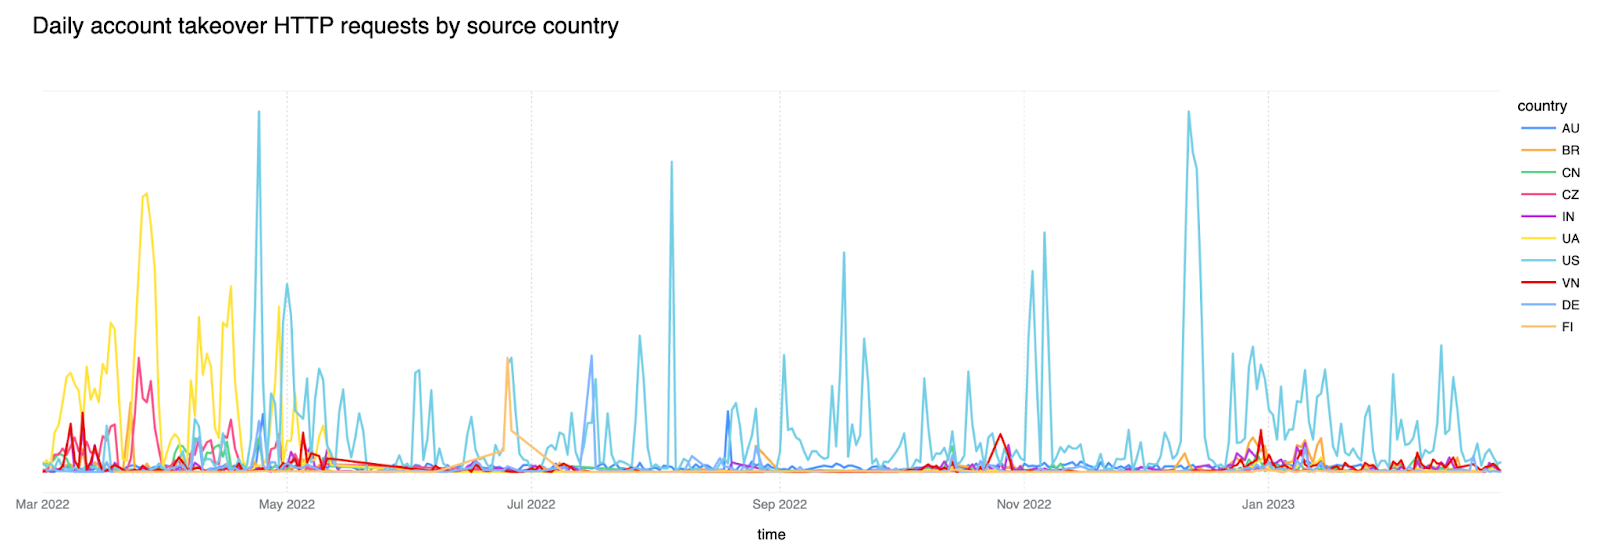 Daily account takeover HTTP requests by country over the last 12 months